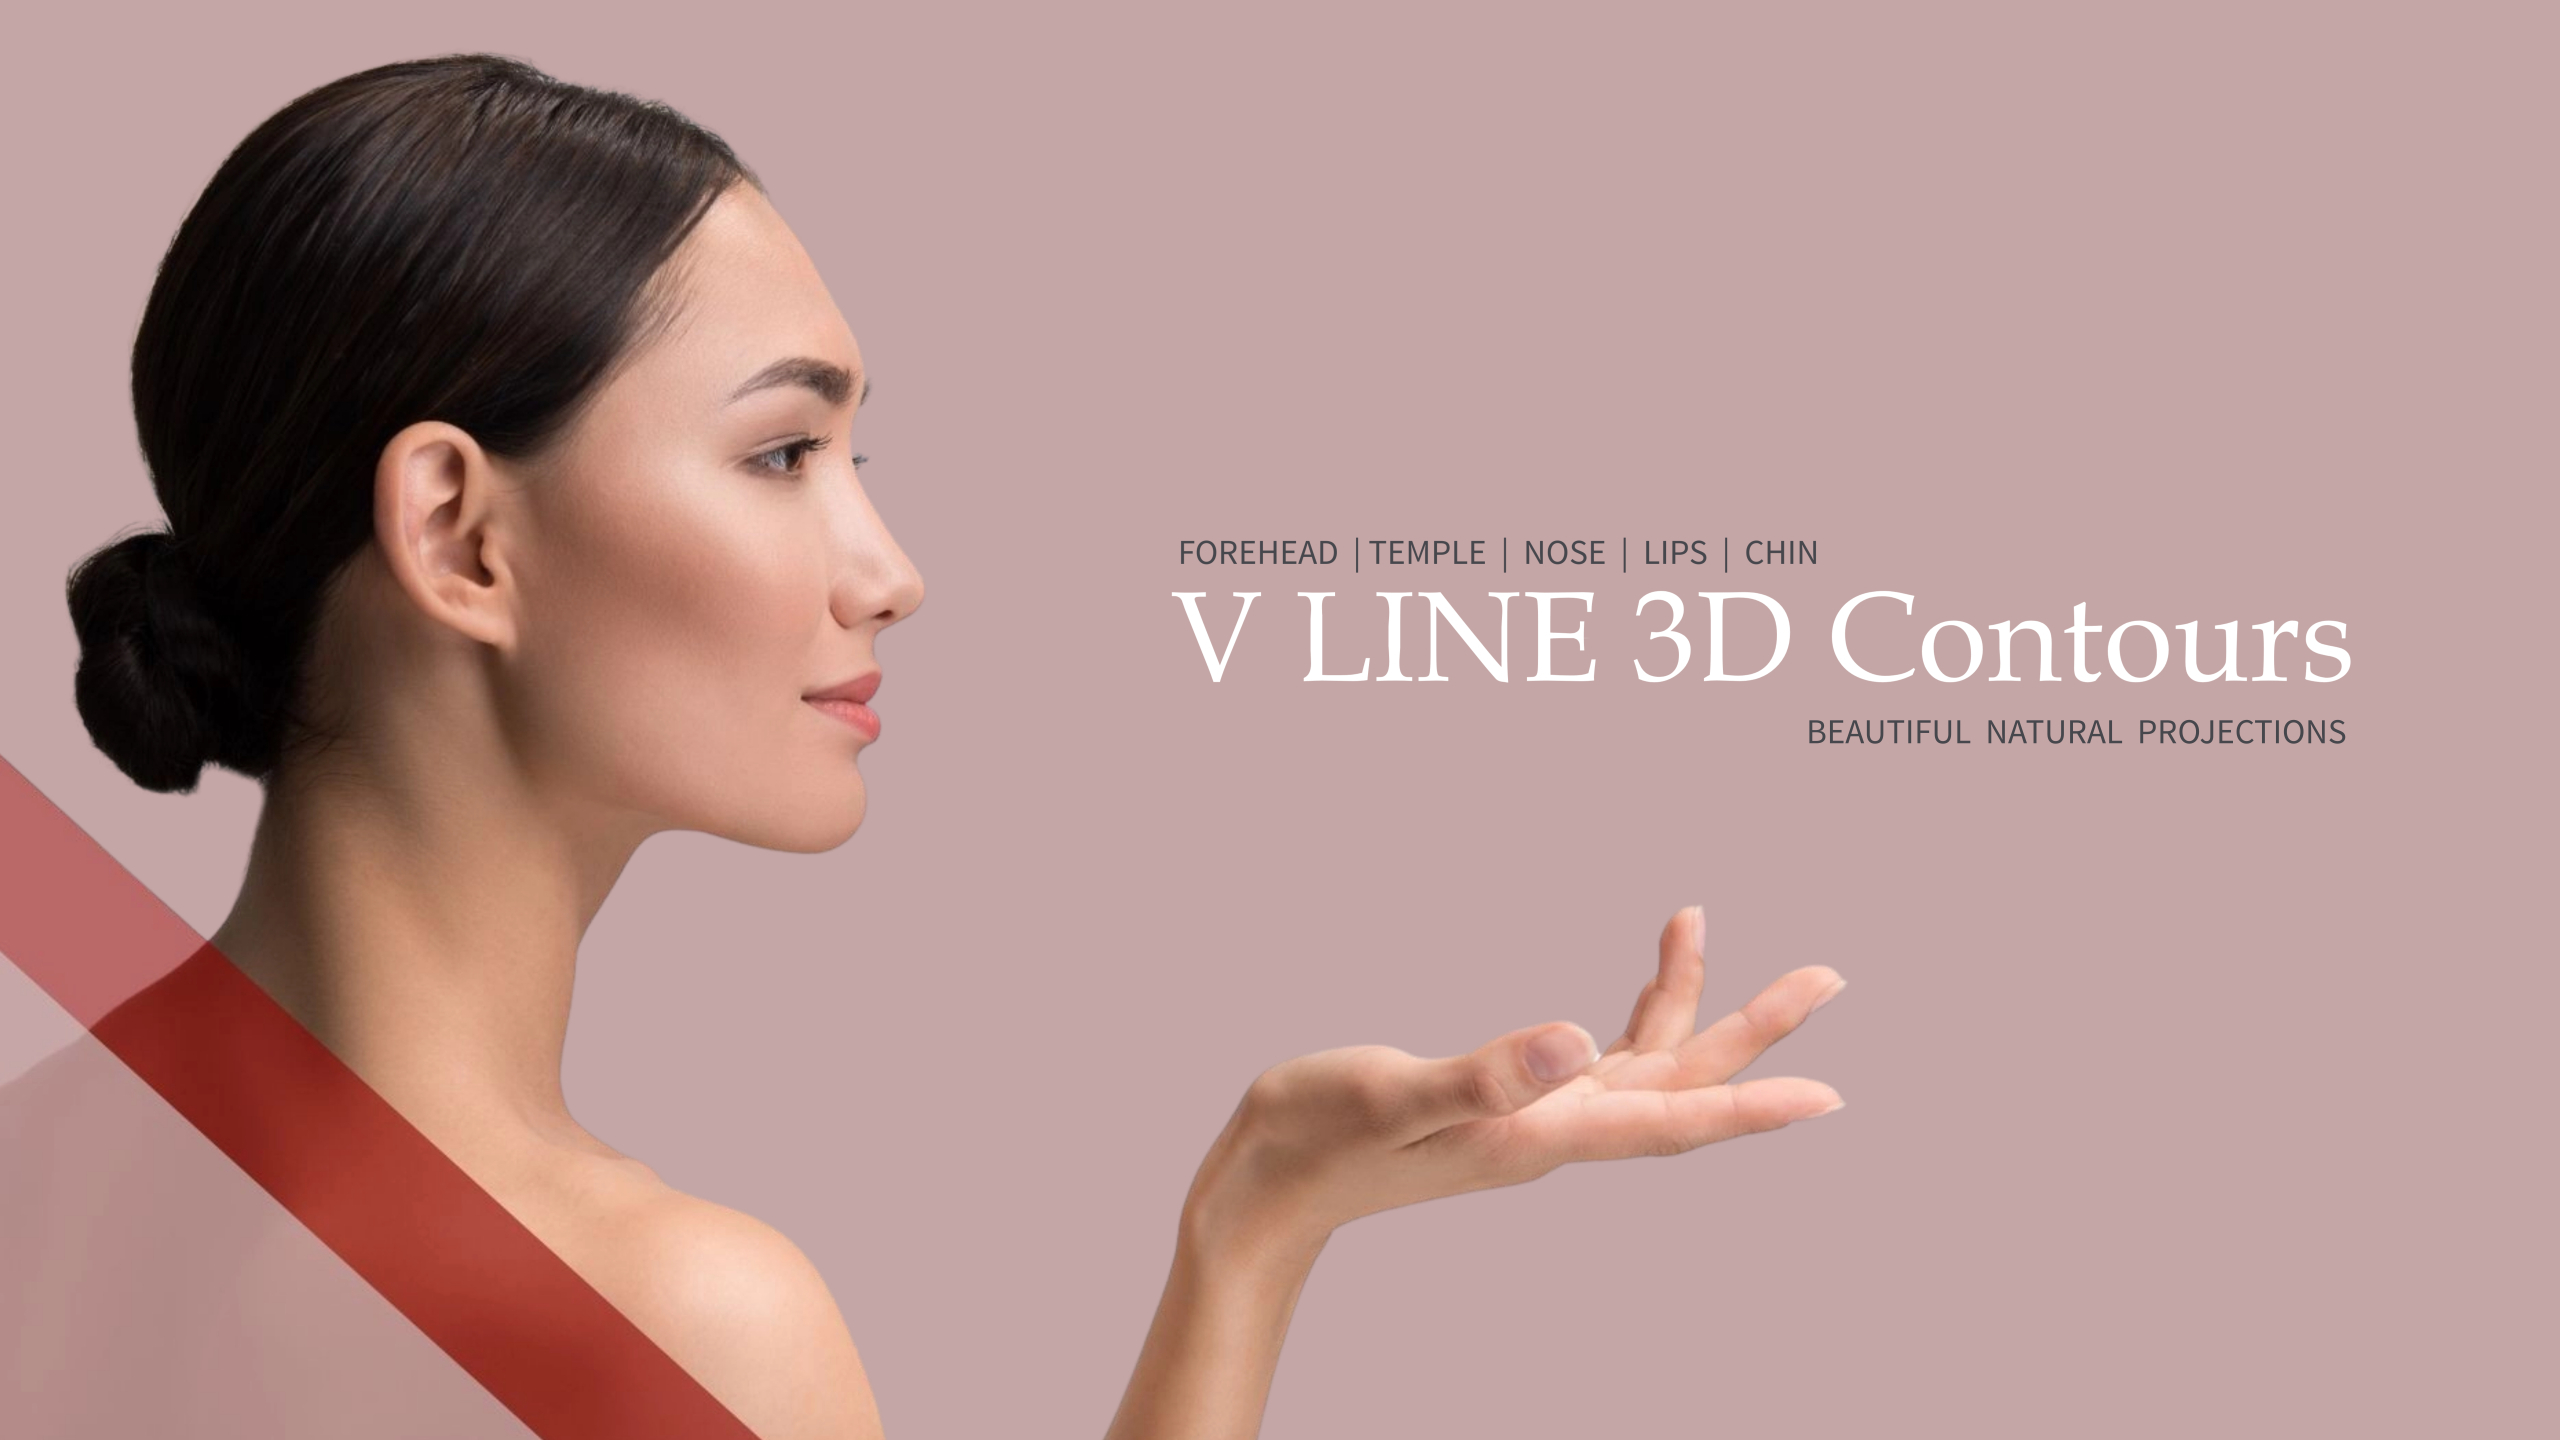 SKIN PERFECT BROTHERS - 3D Contouring SERVICE PAGE